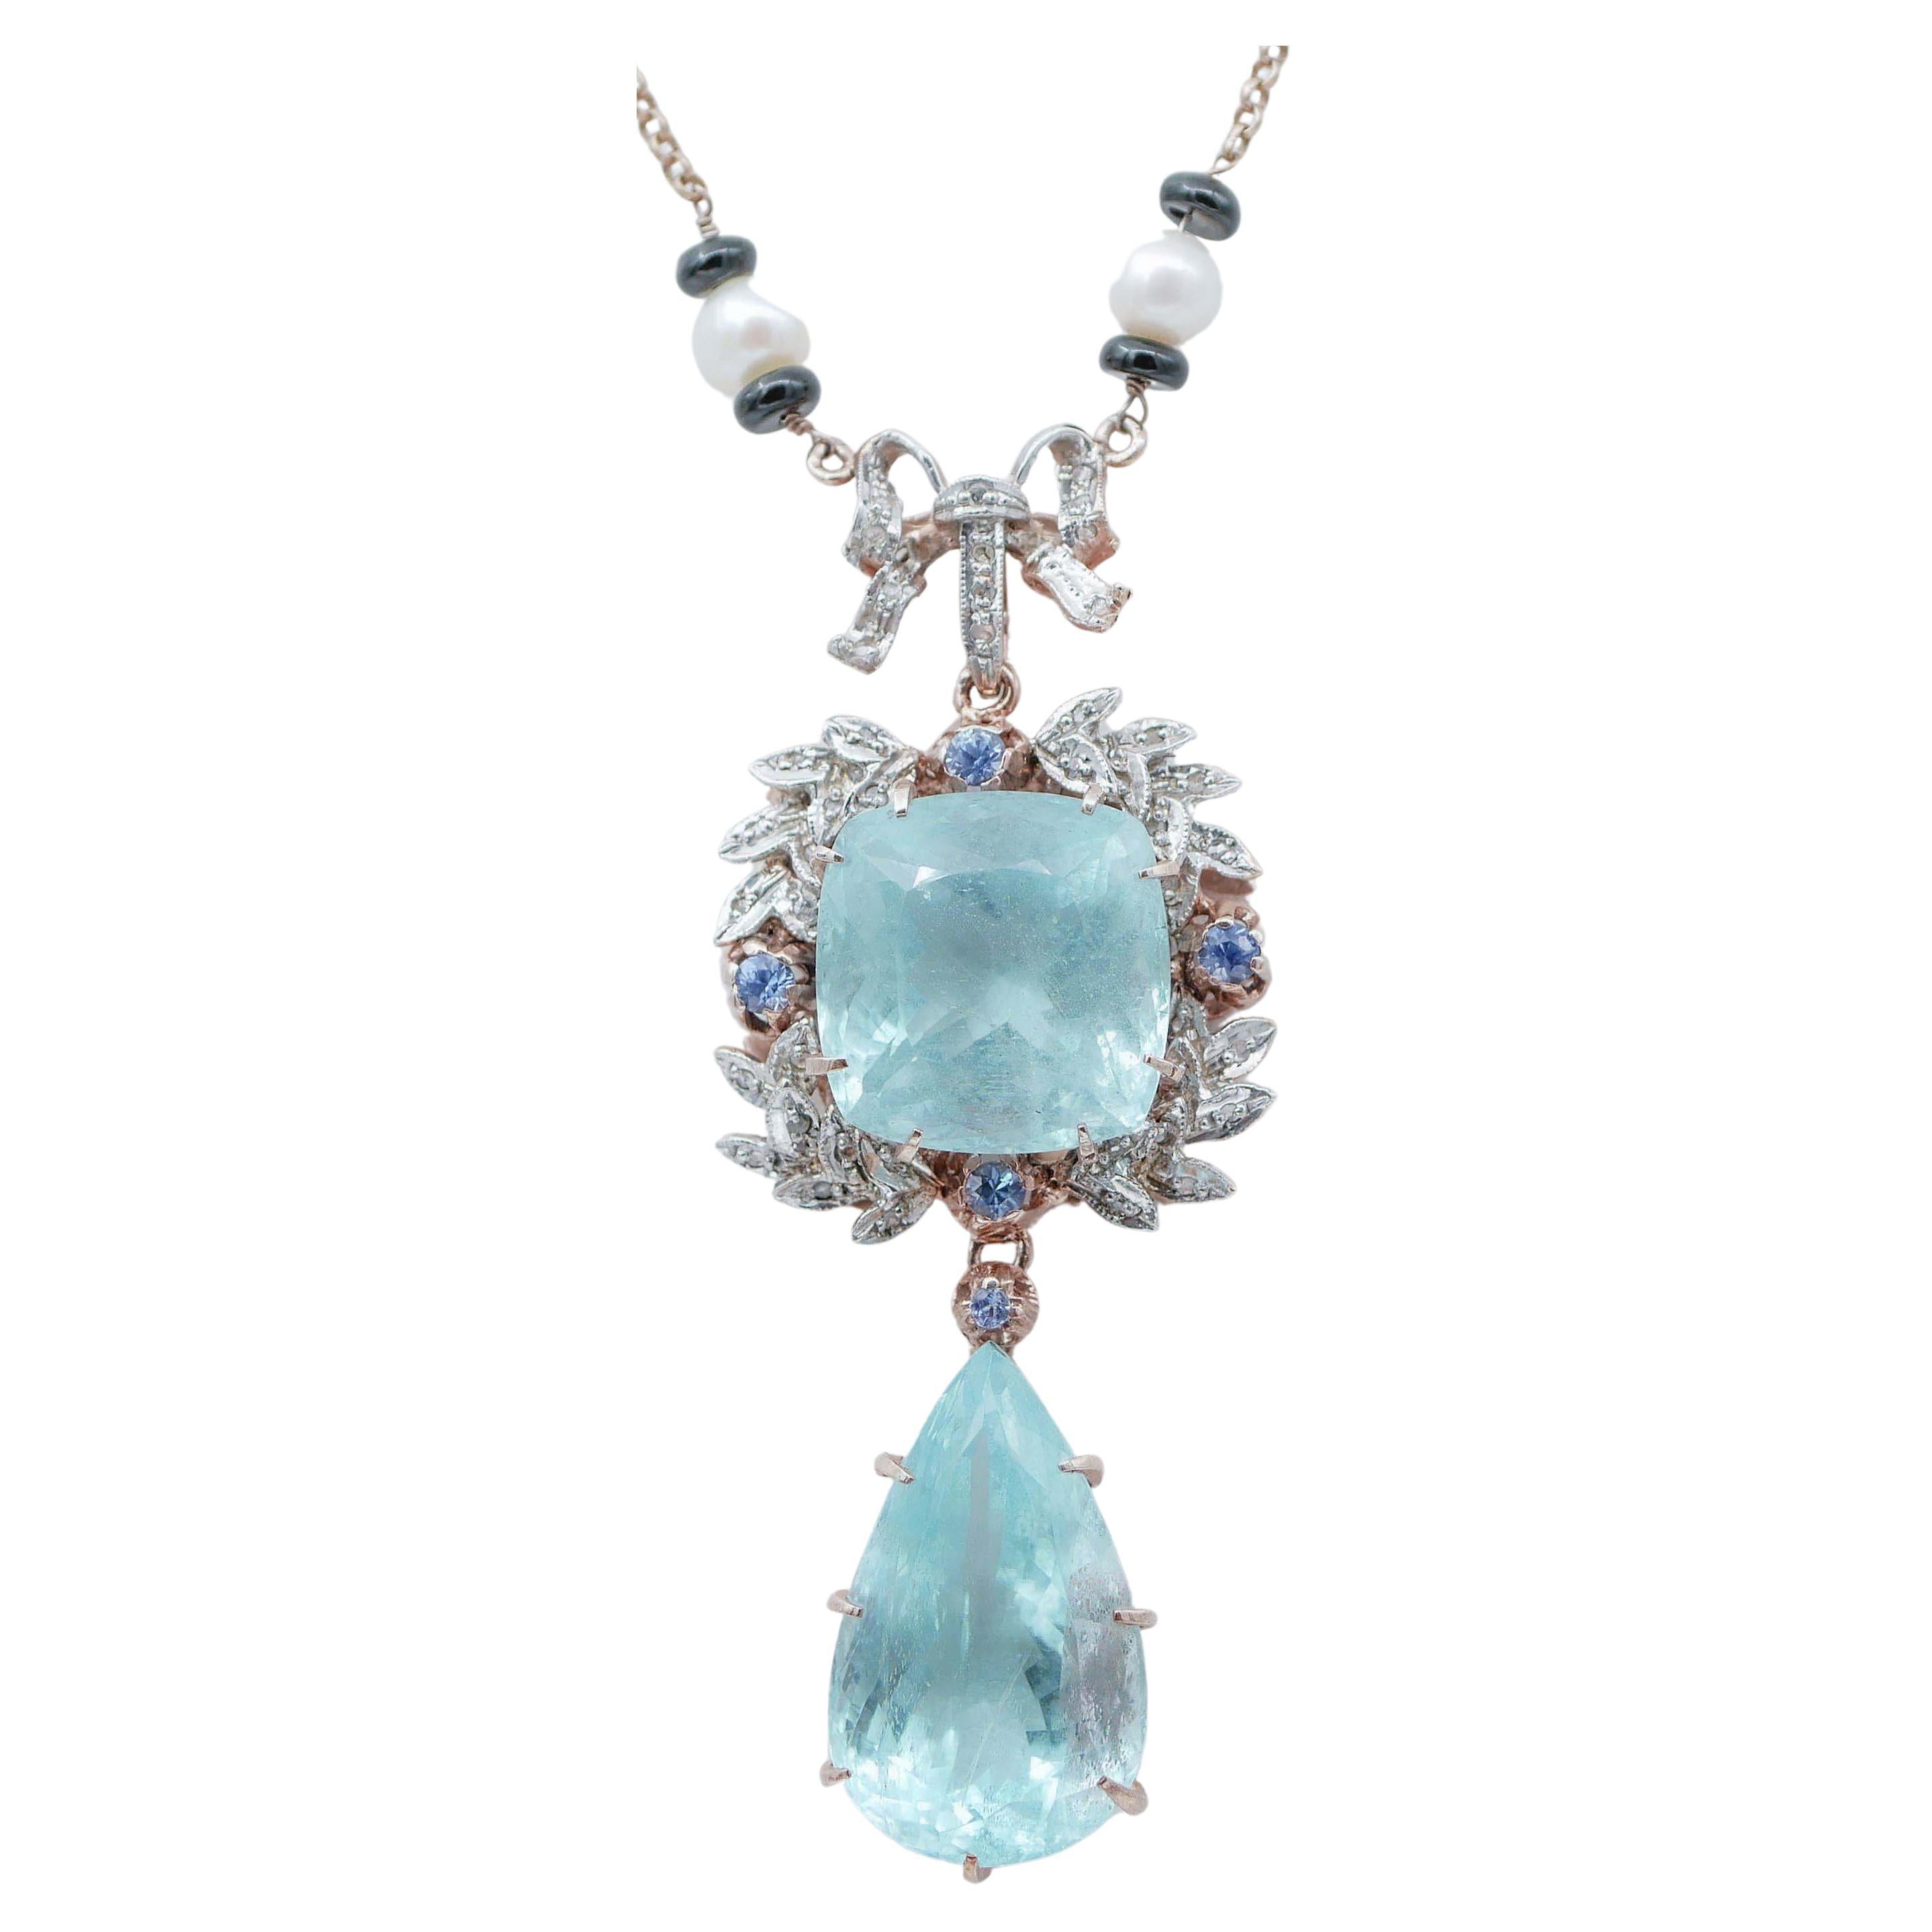 Aquamarine, Sapphires, Diamonds, Onyx, Pearls, Gold and Silver Pendant Necklace For Sale